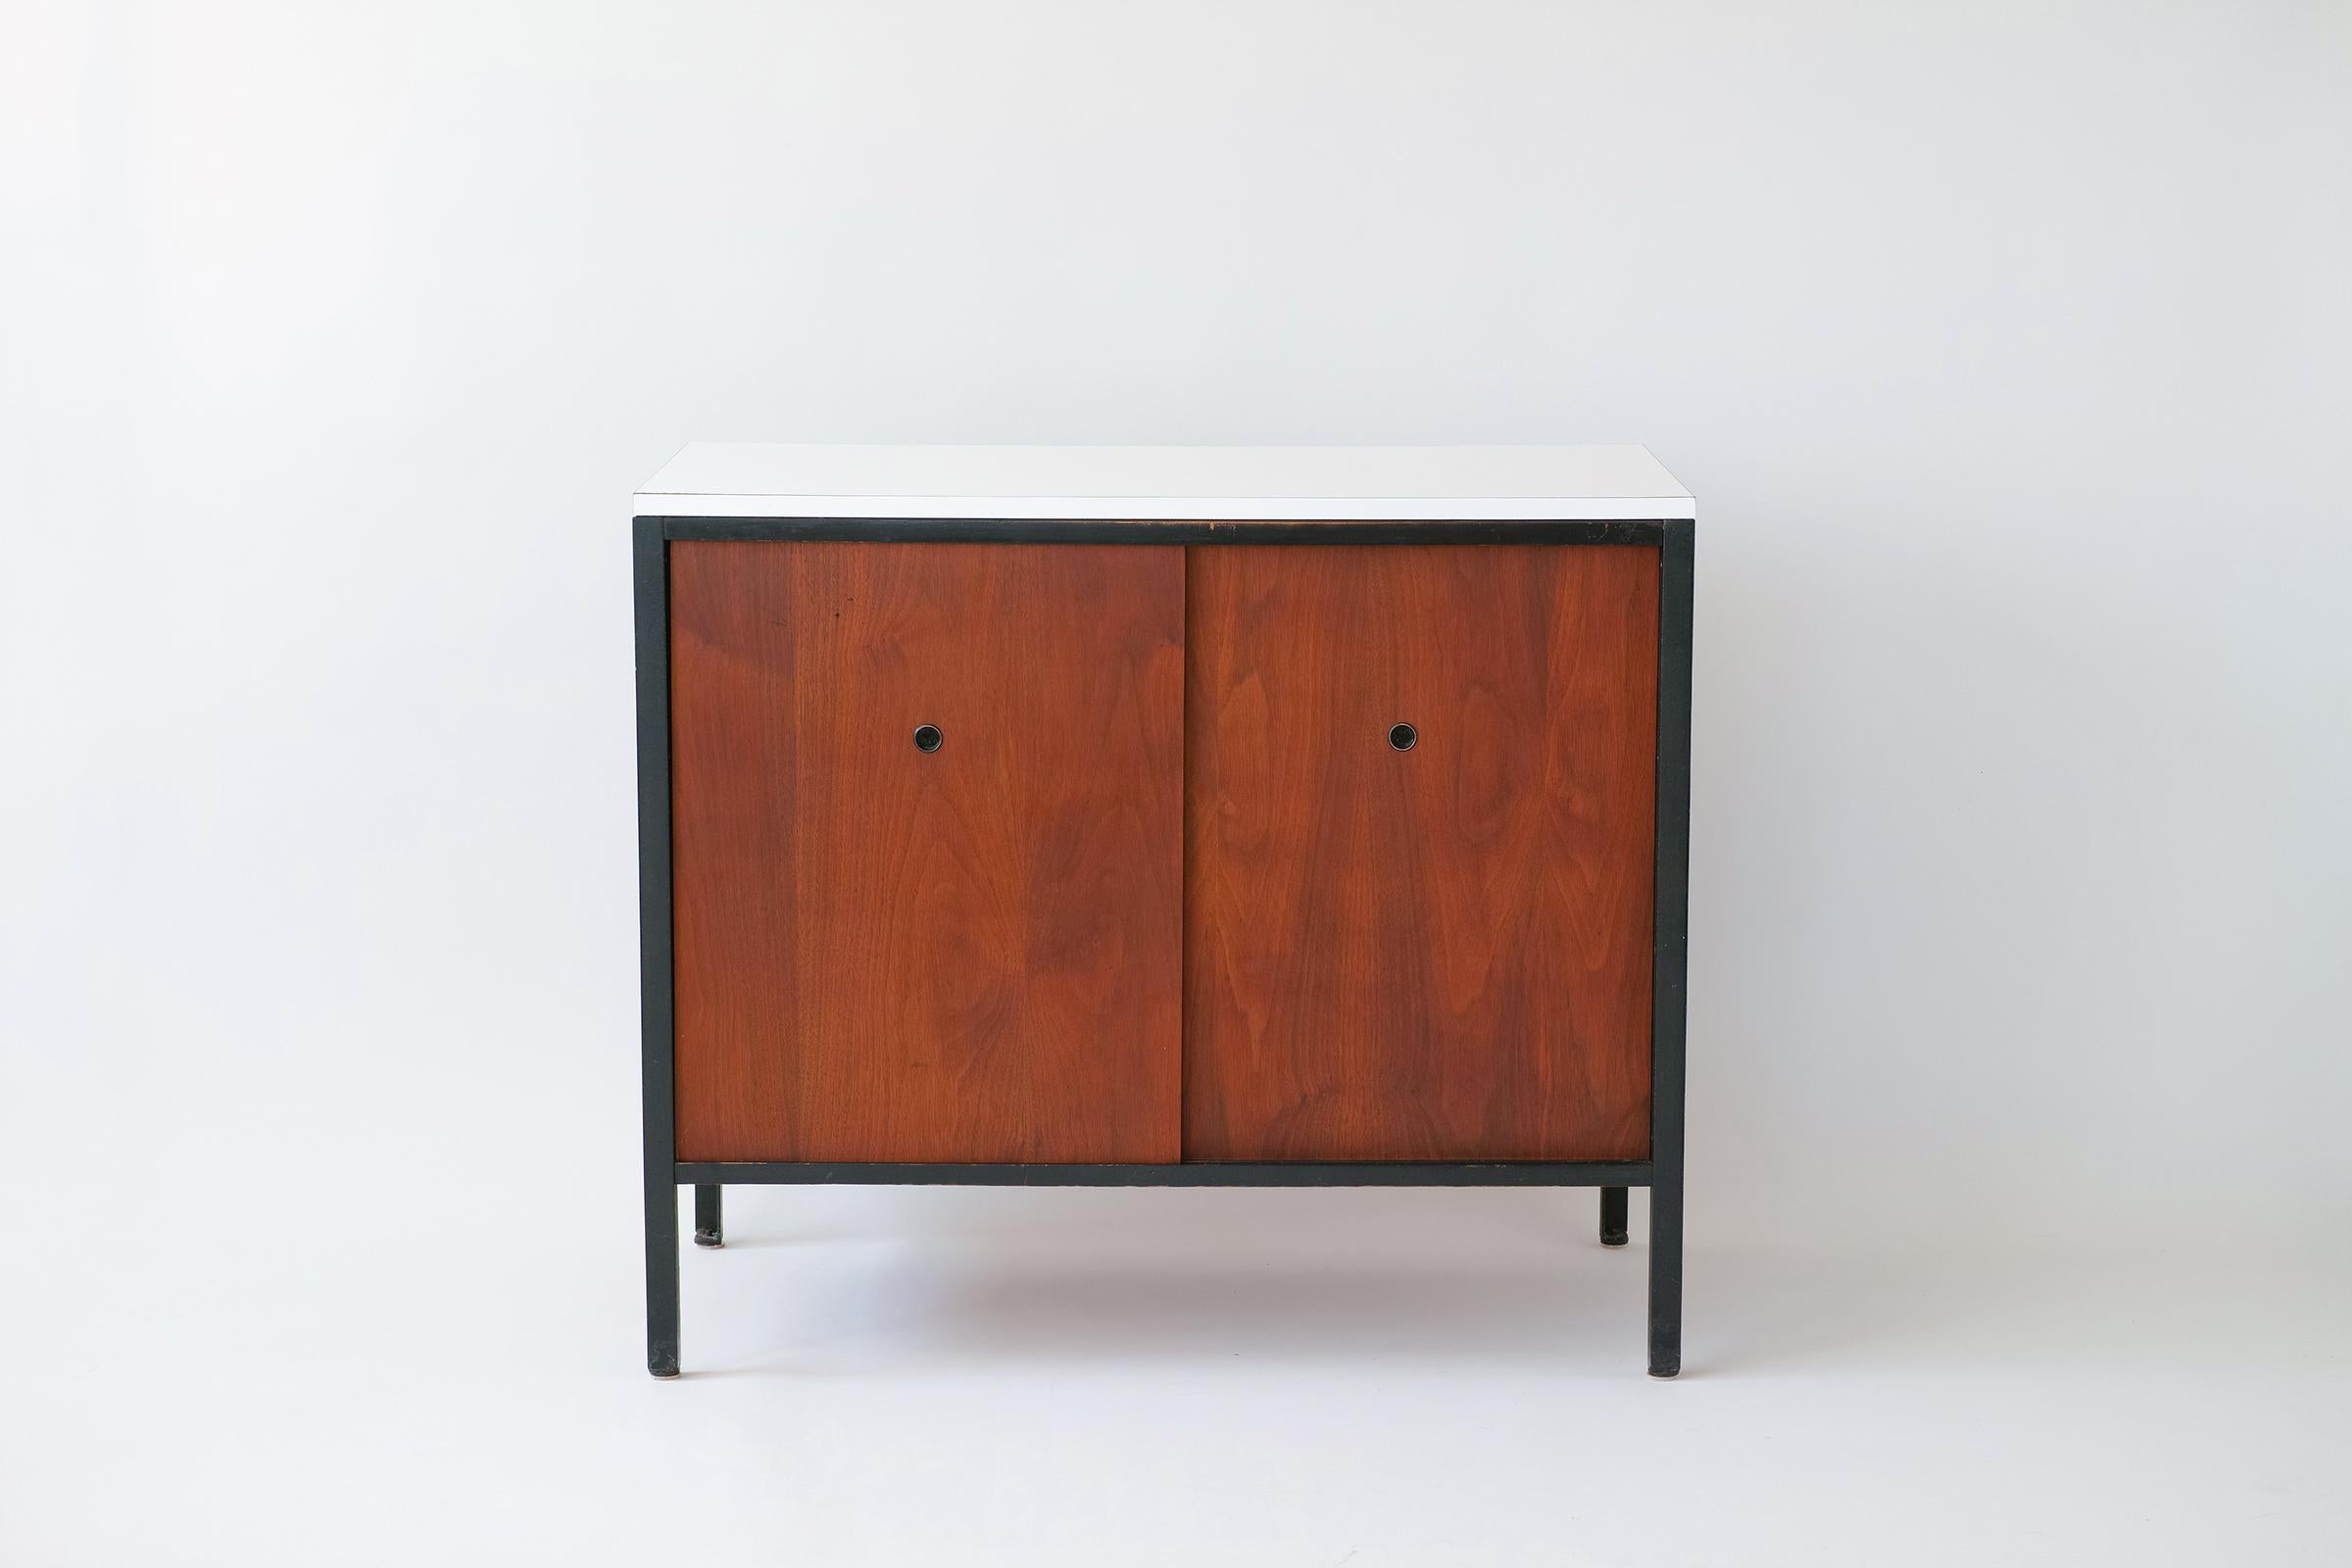 For you consideration is this rare L10 Cabinet by Allan Gould featuring walnut case with original oiled finish; ebonized interior with adjustable shelf; finished back; and original white plastic laminate top.